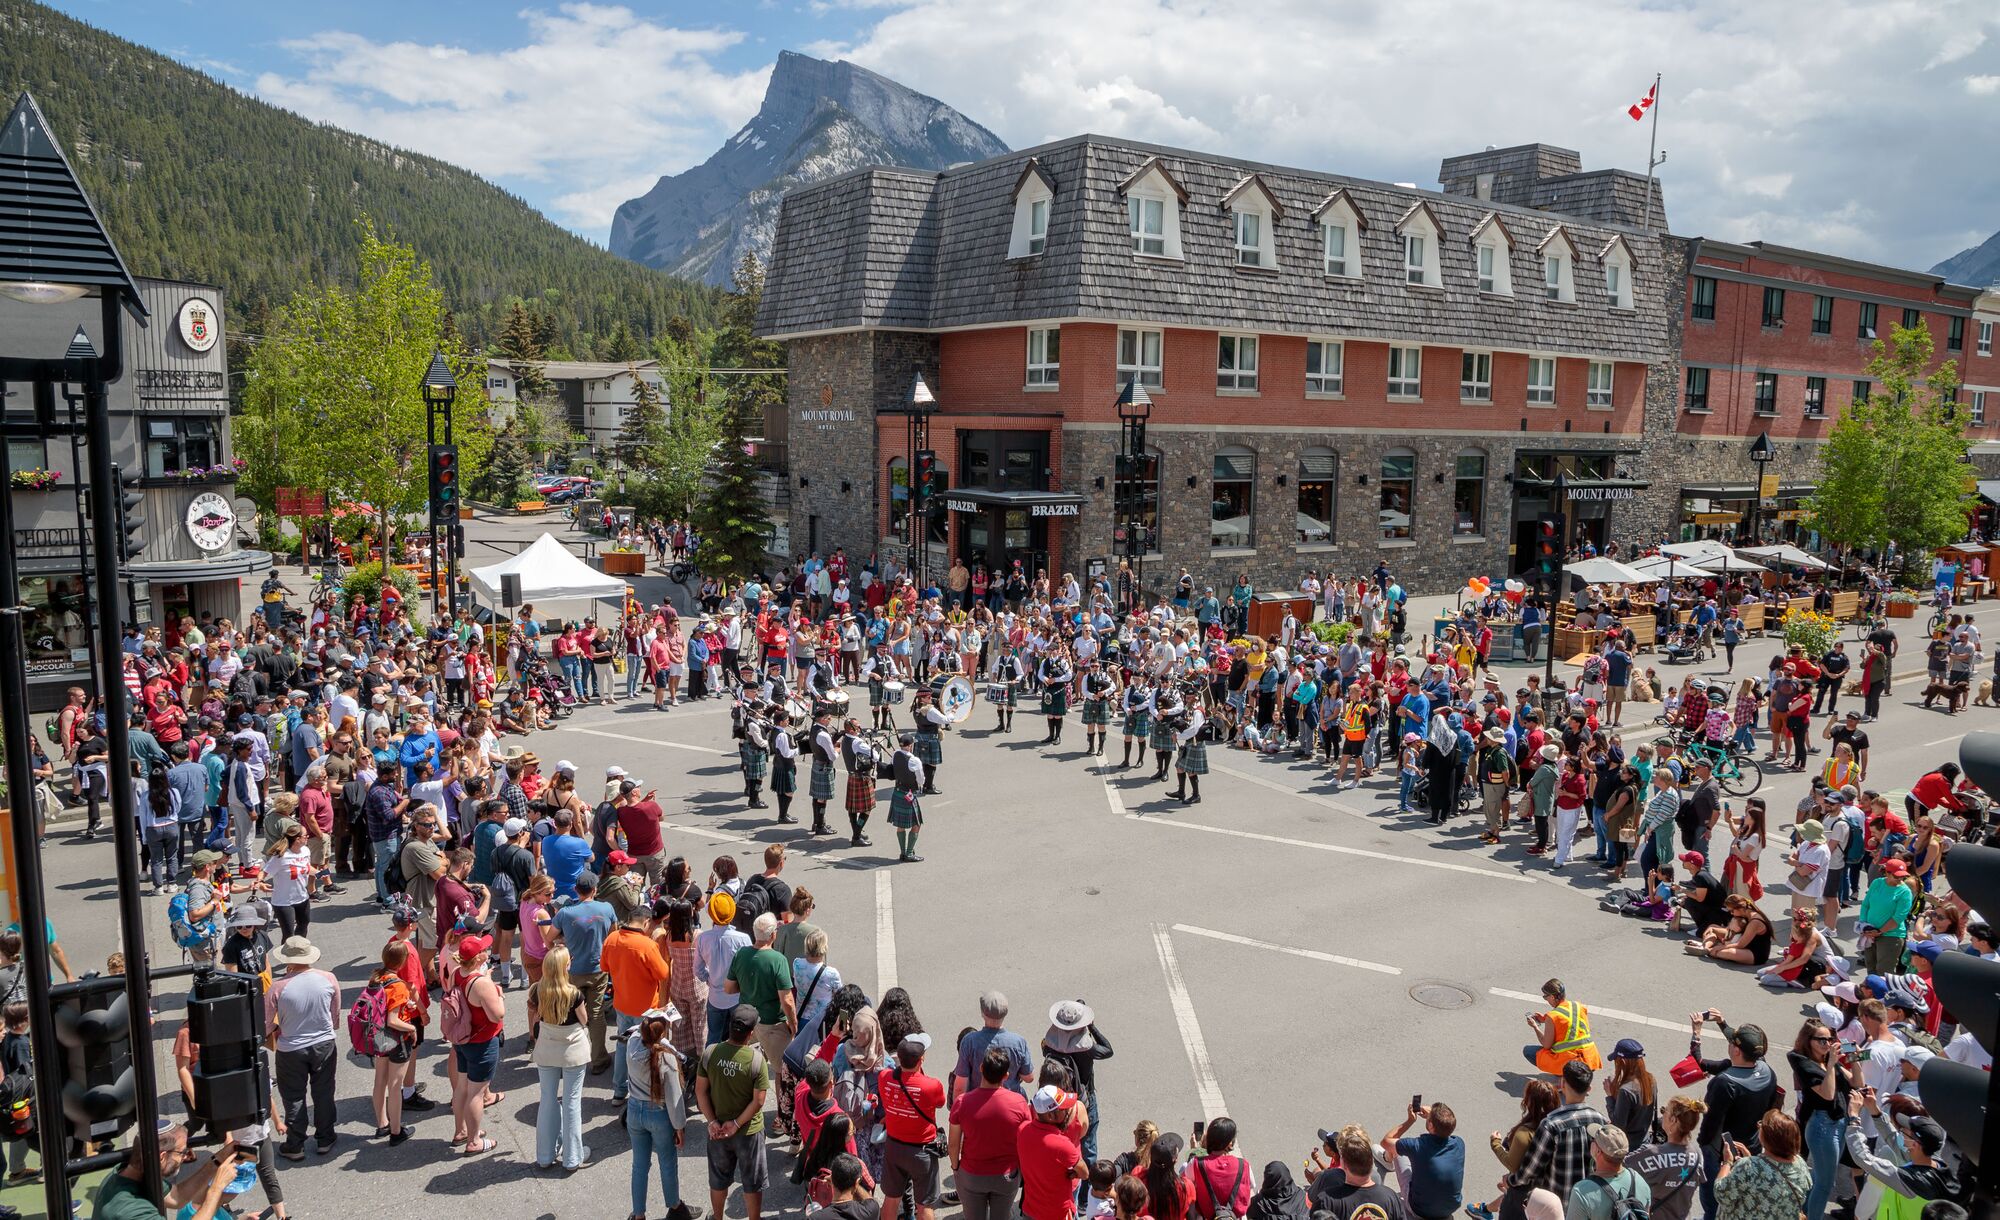 Musicians on Banff Ave during Canada Day in Banff National Park.